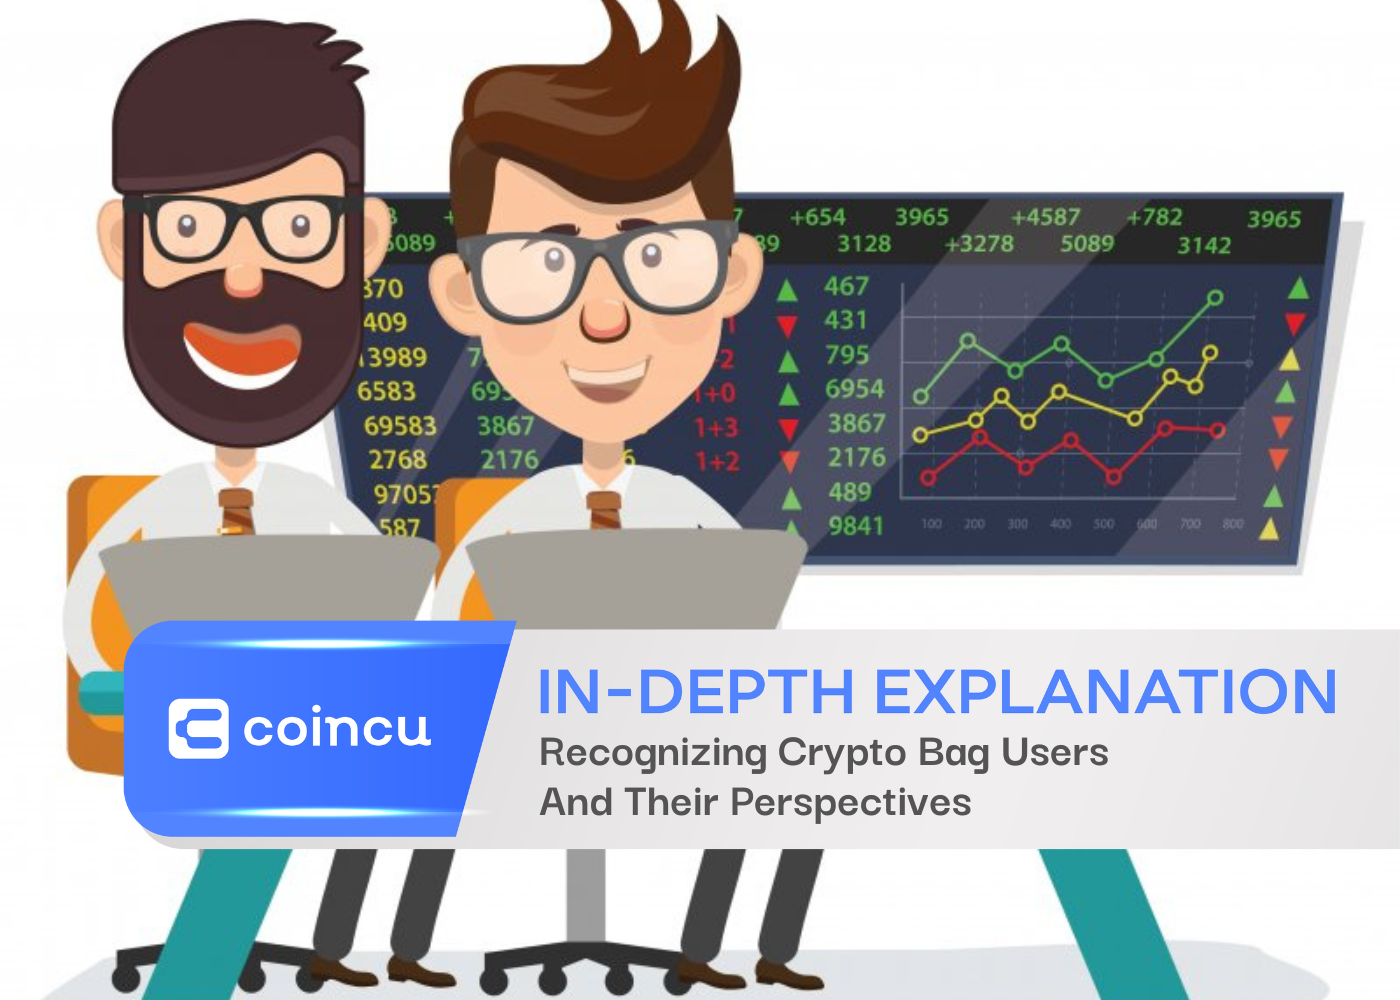 Recognizing Crypto Bag Users